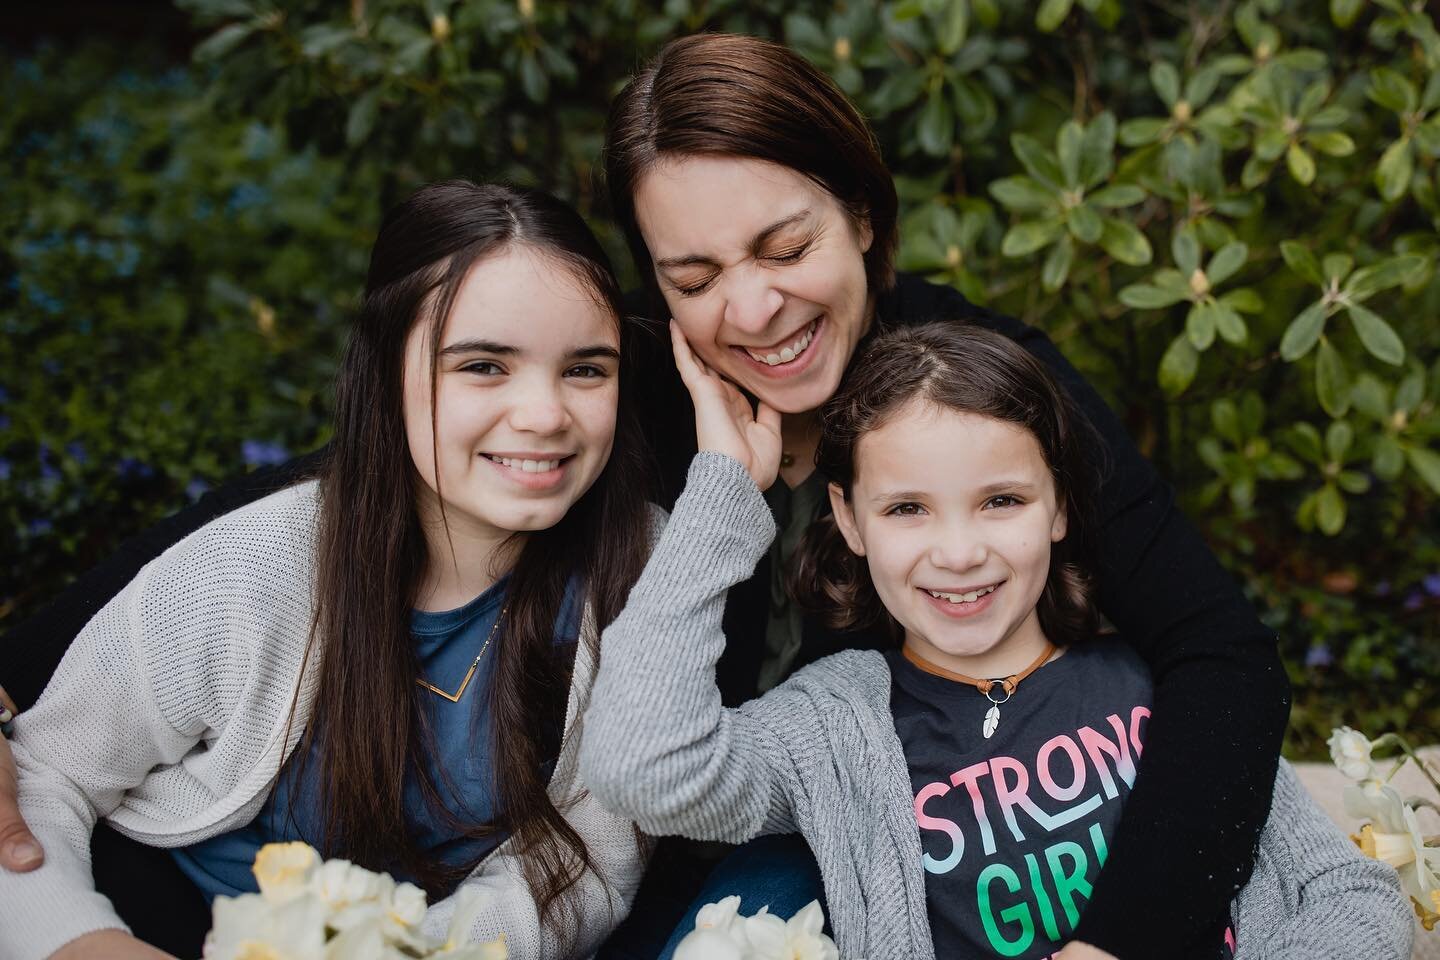 Happy Mother&rsquo;s Day to all the mamas out there. I hope you felt lots of love today. And to anyone feeling sadness for whatever reason today, sending you a big virtual hug ❤️ 

Thank you for this beautiful capture of me + my girls @lindsaystephan